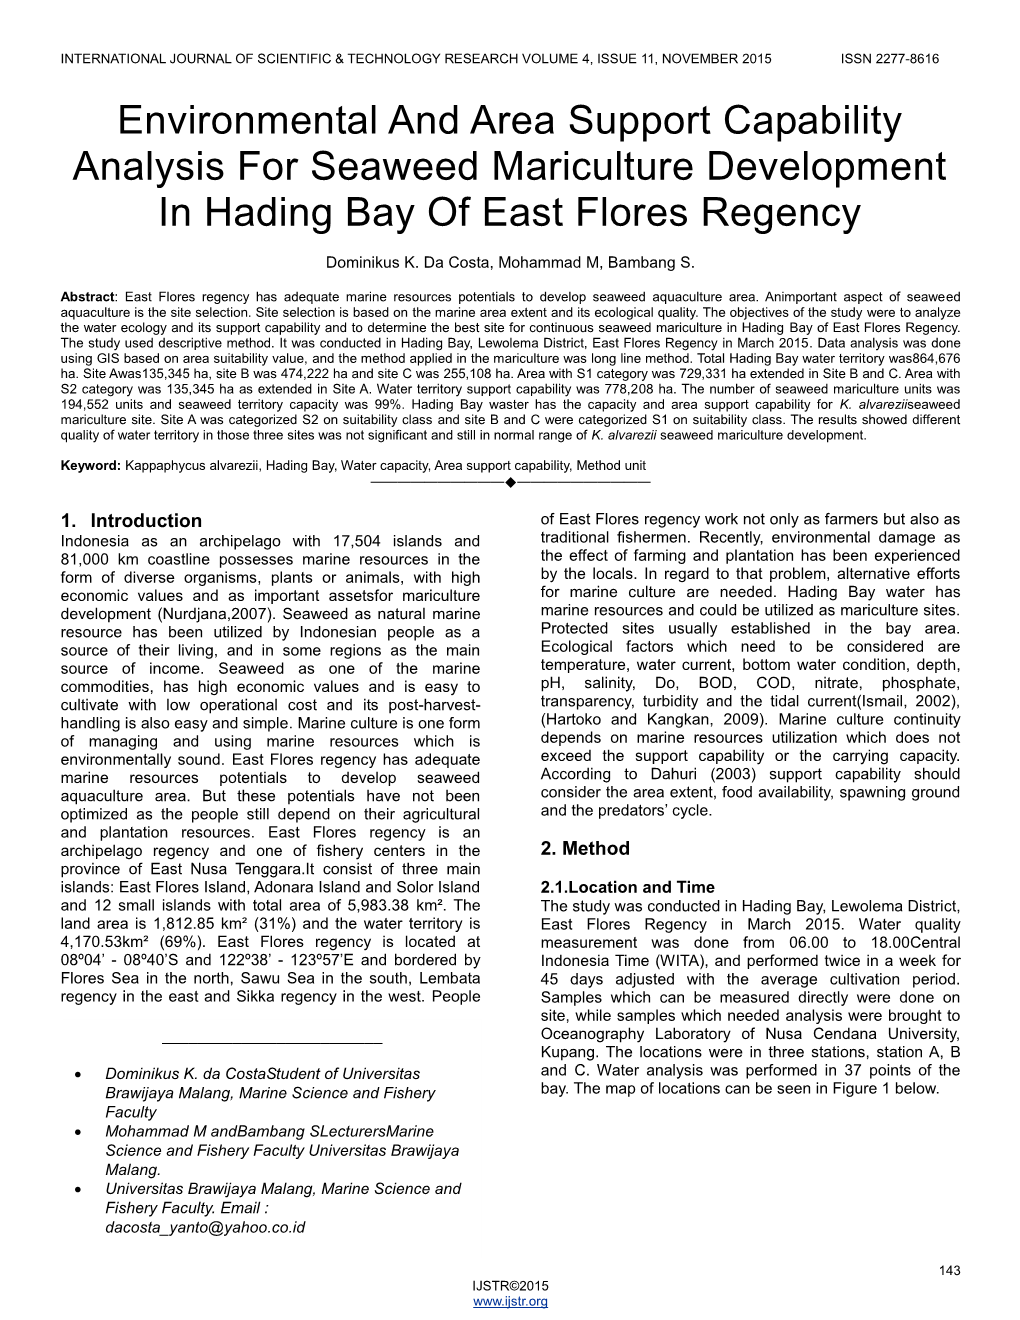 Environmental and Area Support Capability Analysis for Seaweed Mariculture Development in Hading Bay of East Flores Regency